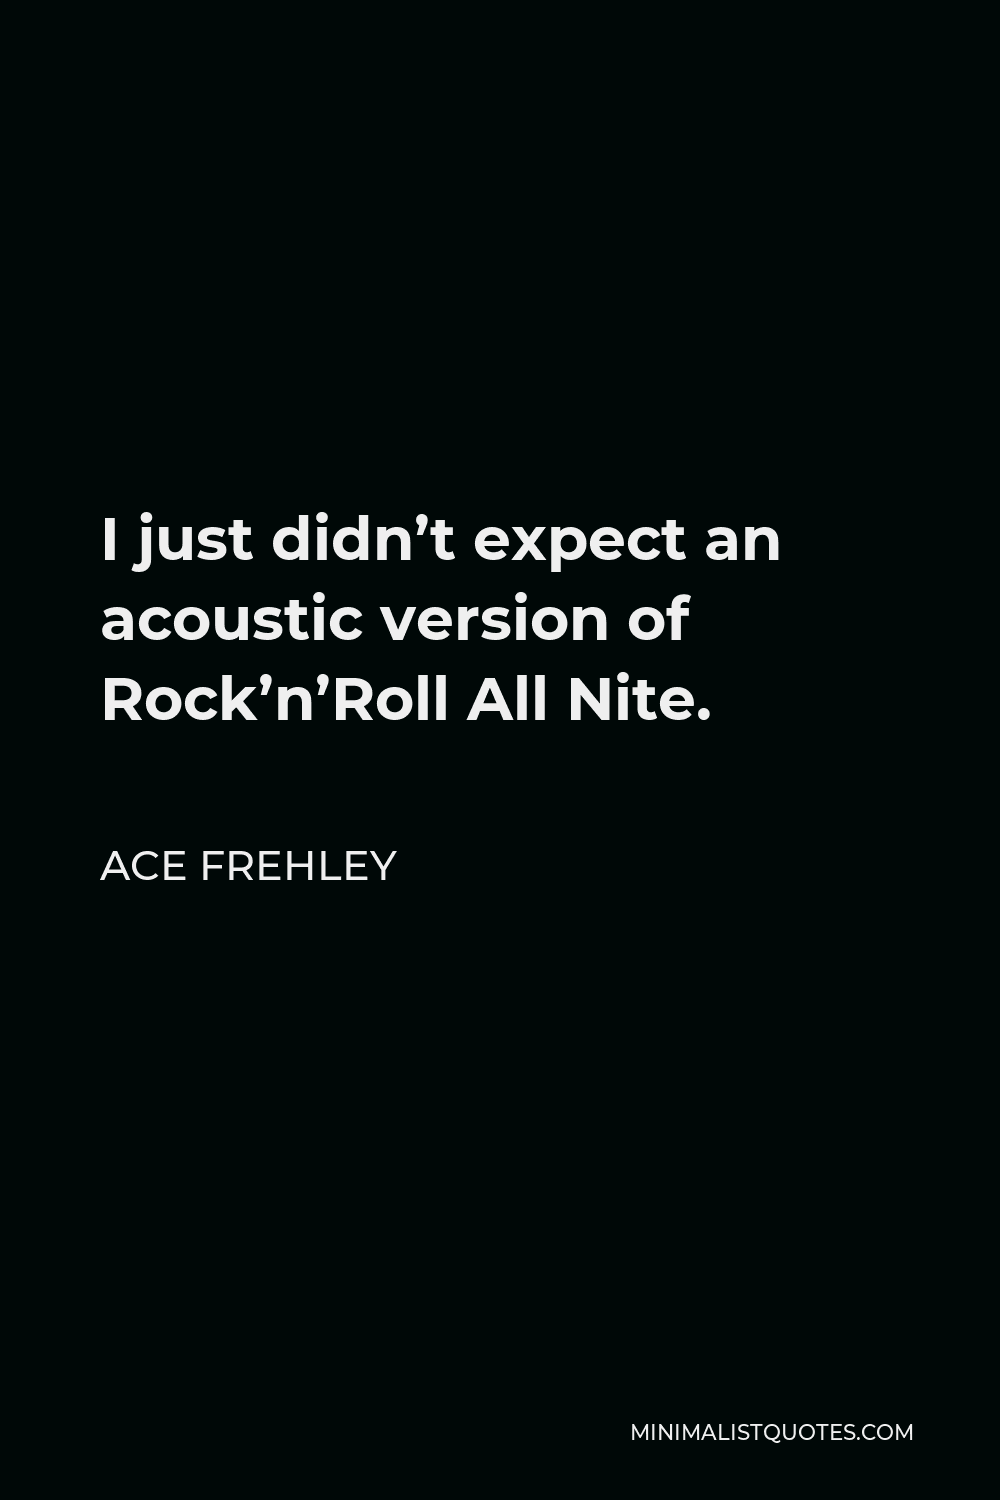 Ace Frehley Quote - I just didn’t expect an acoustic version of Rock’n’Roll All Nite.